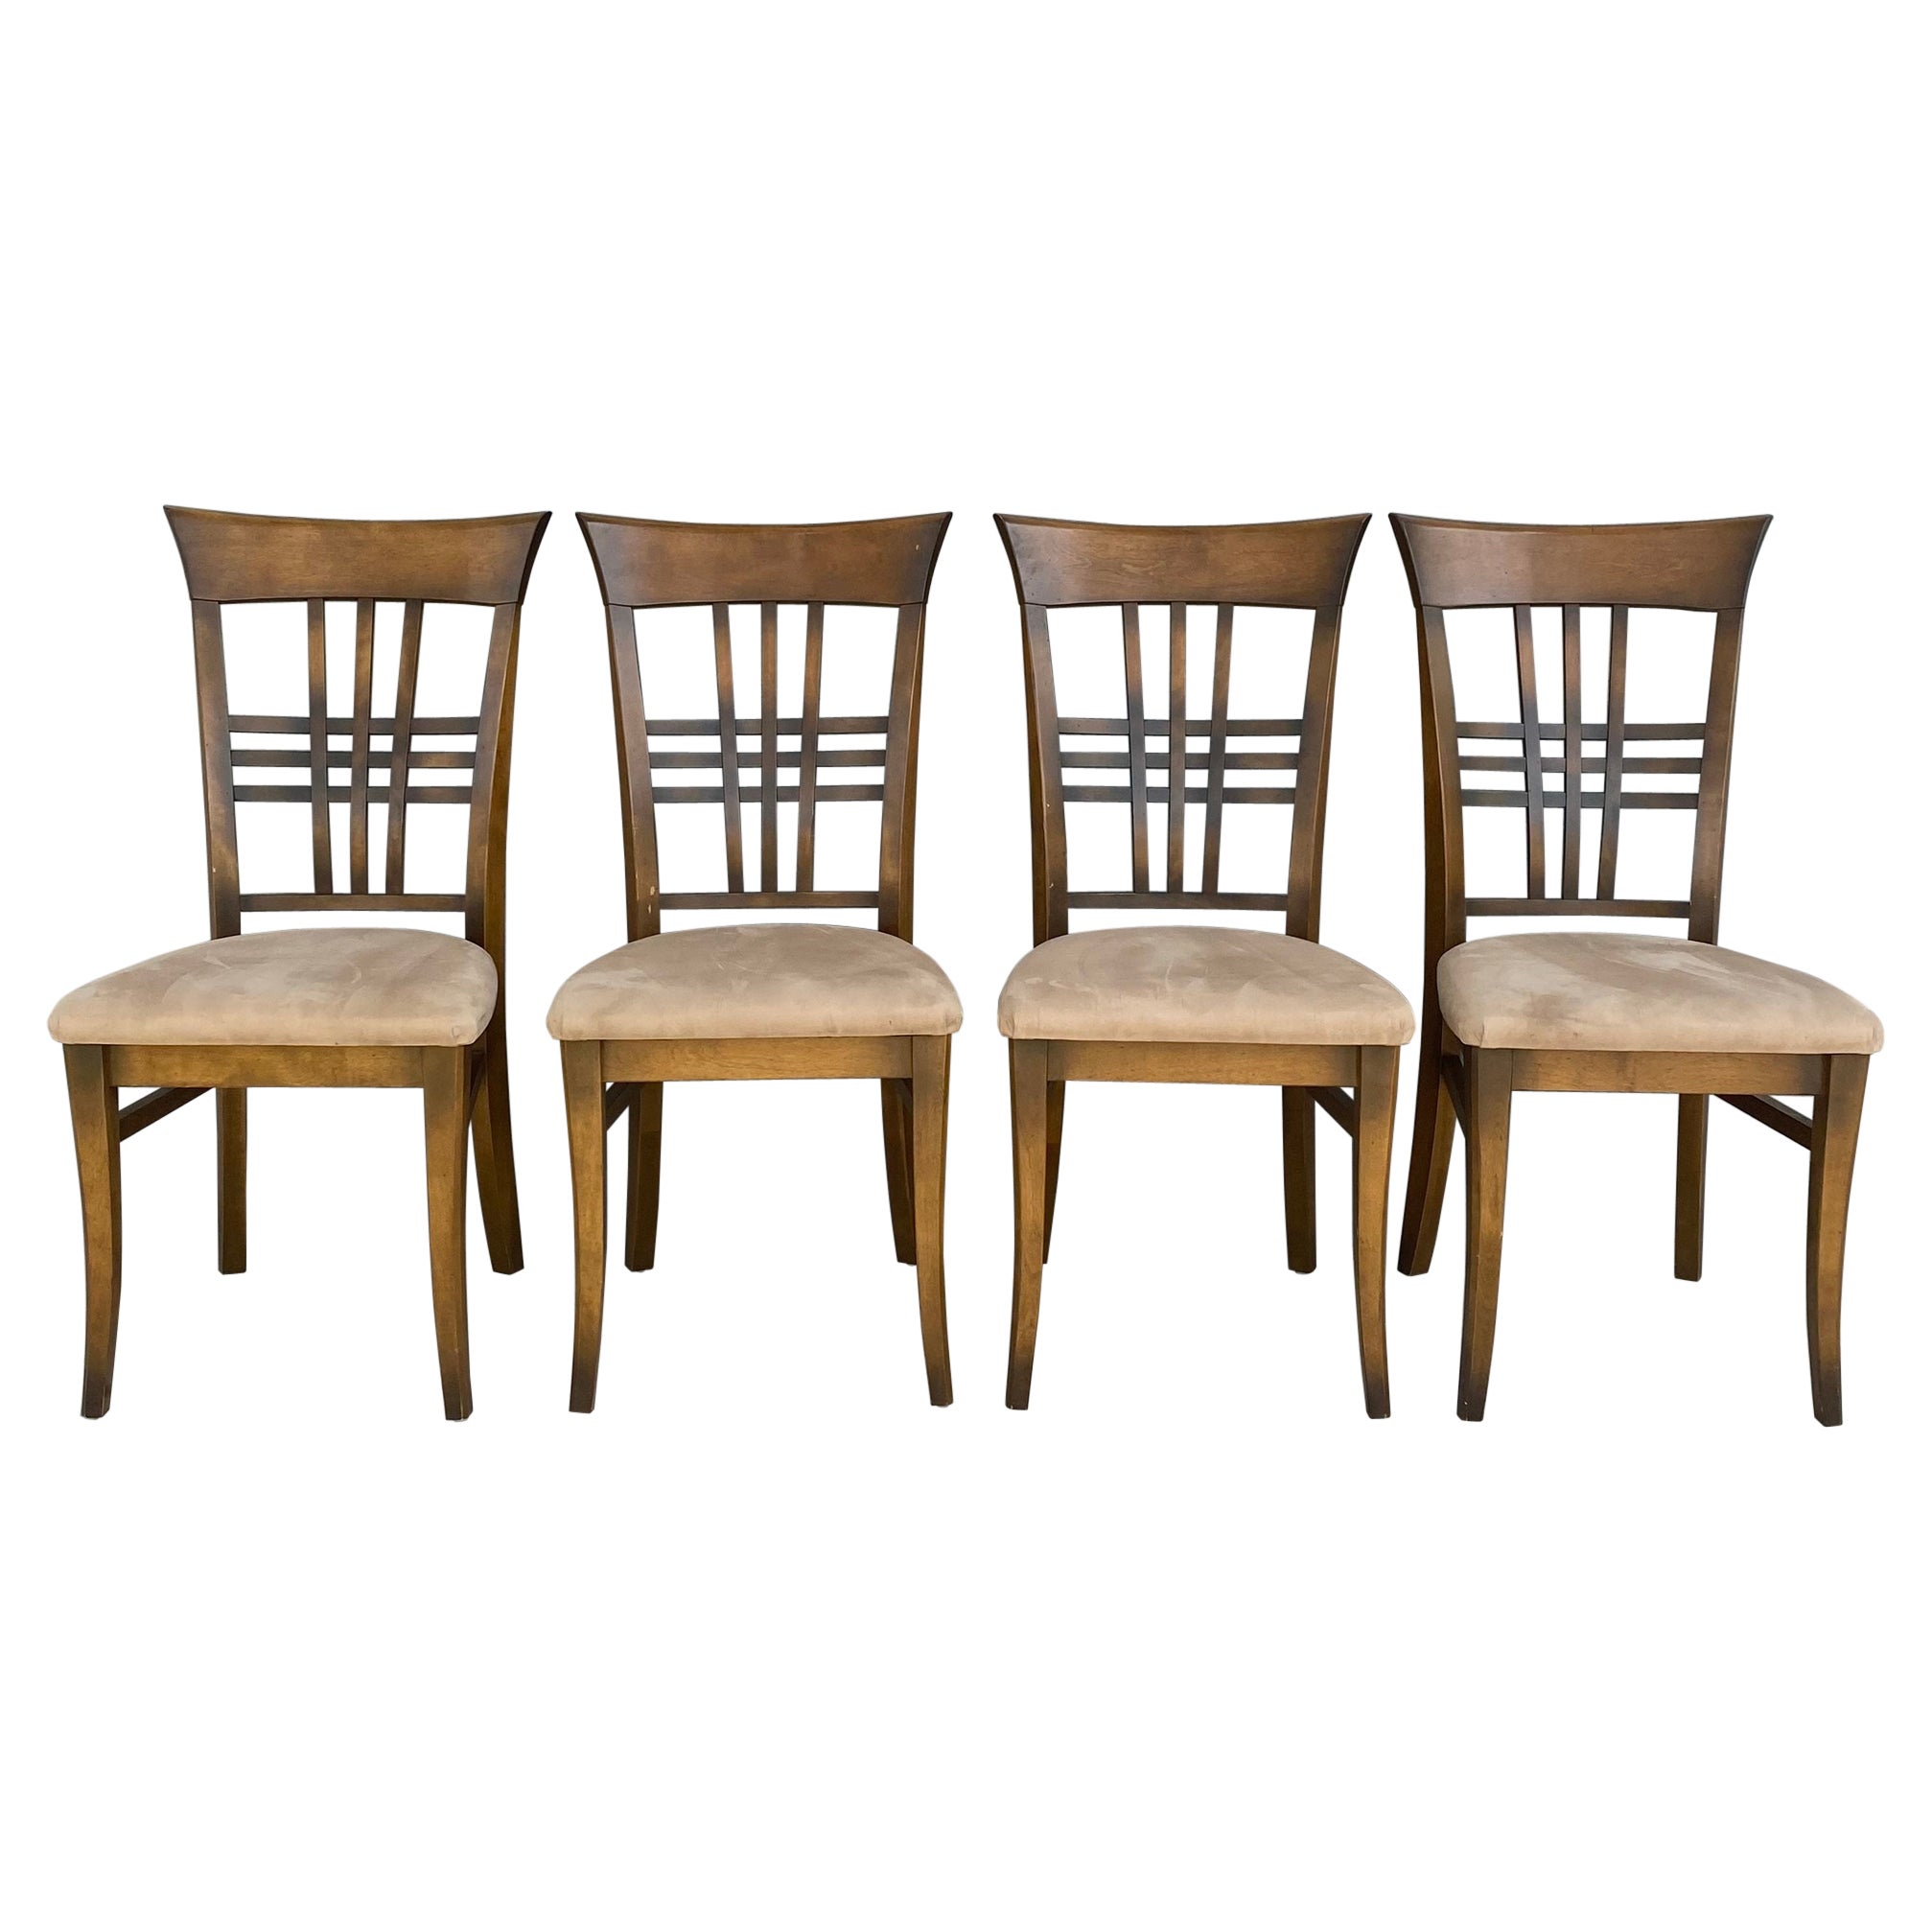 Thomasville Slat Back Oak Dining Chairs, Set of 4 For Sale